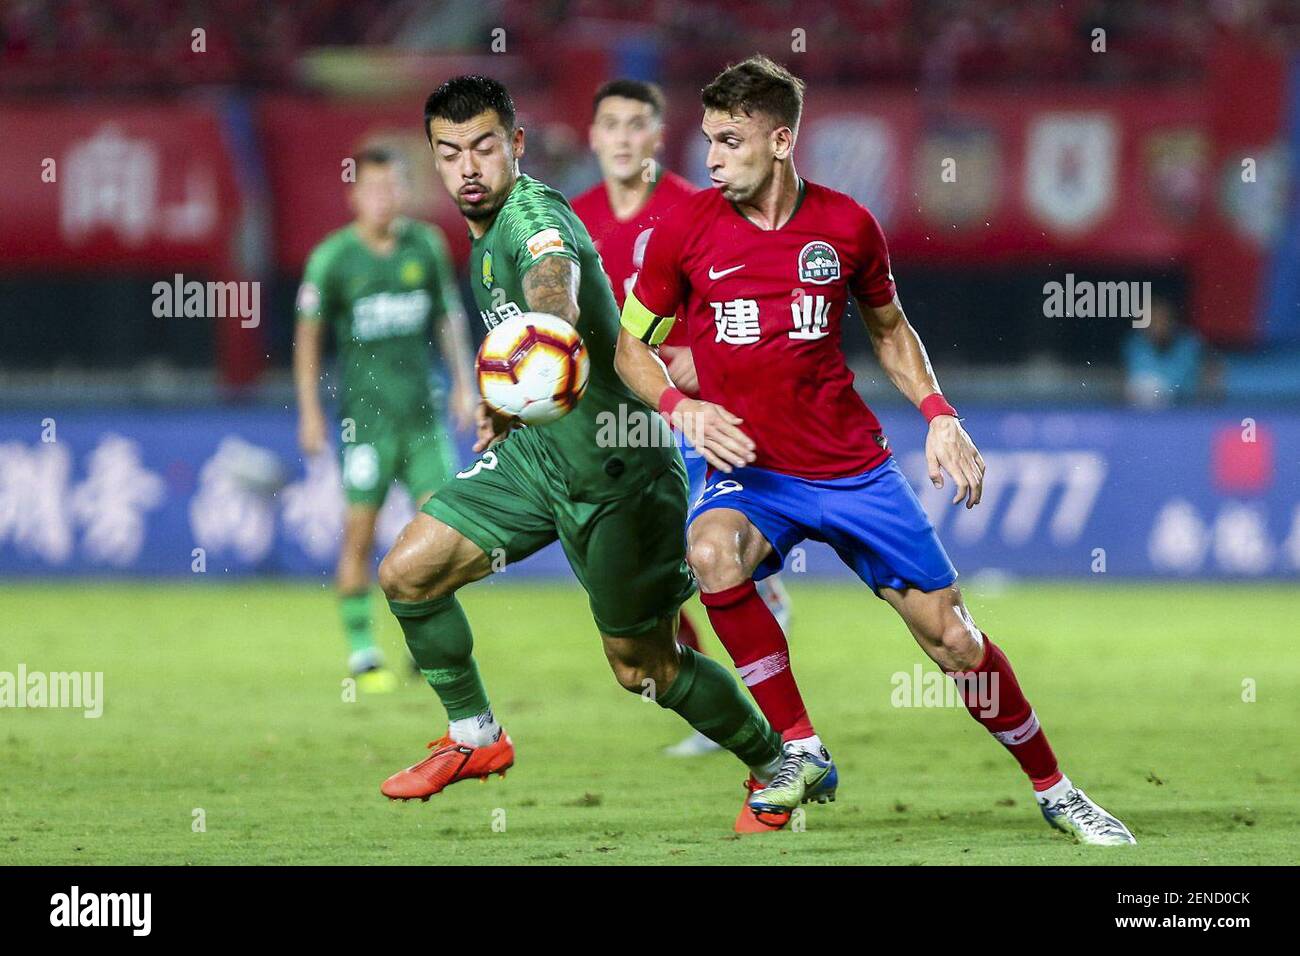 Brazilian football player Olivio da Rosa, also known as Ivo, right, of Henan Jianye passes the ball against English football player Nico Yennaris, known in China as Li Ke, of Beijing Sinobo Guoan in their 20th round match during the 2019 Chinese Football Association Super League (CSL) in Zhengzhou city, central China's Henan province, 27 July 2019. Henan Jianye defeated Beijing Sinobo Guoan 1-0. (Photo by Stringer - Imaginechina/Sipa USA) Stock Photo